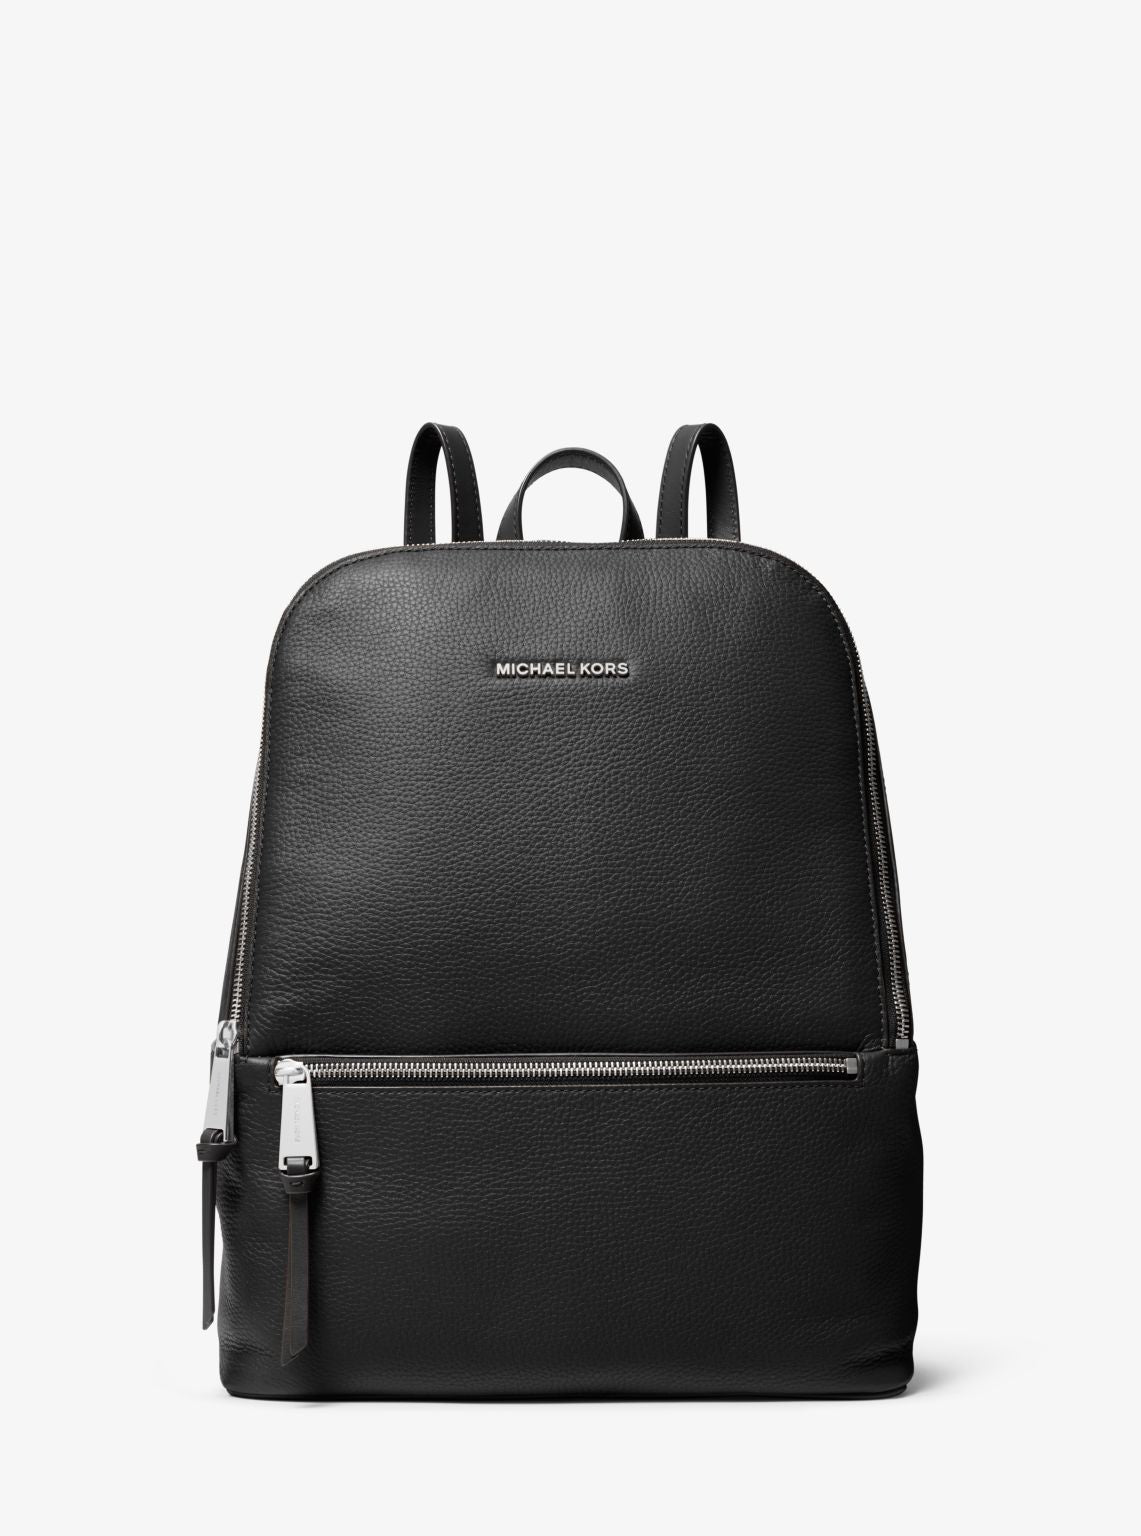 Toby Medium Pebbled Leather Backpack